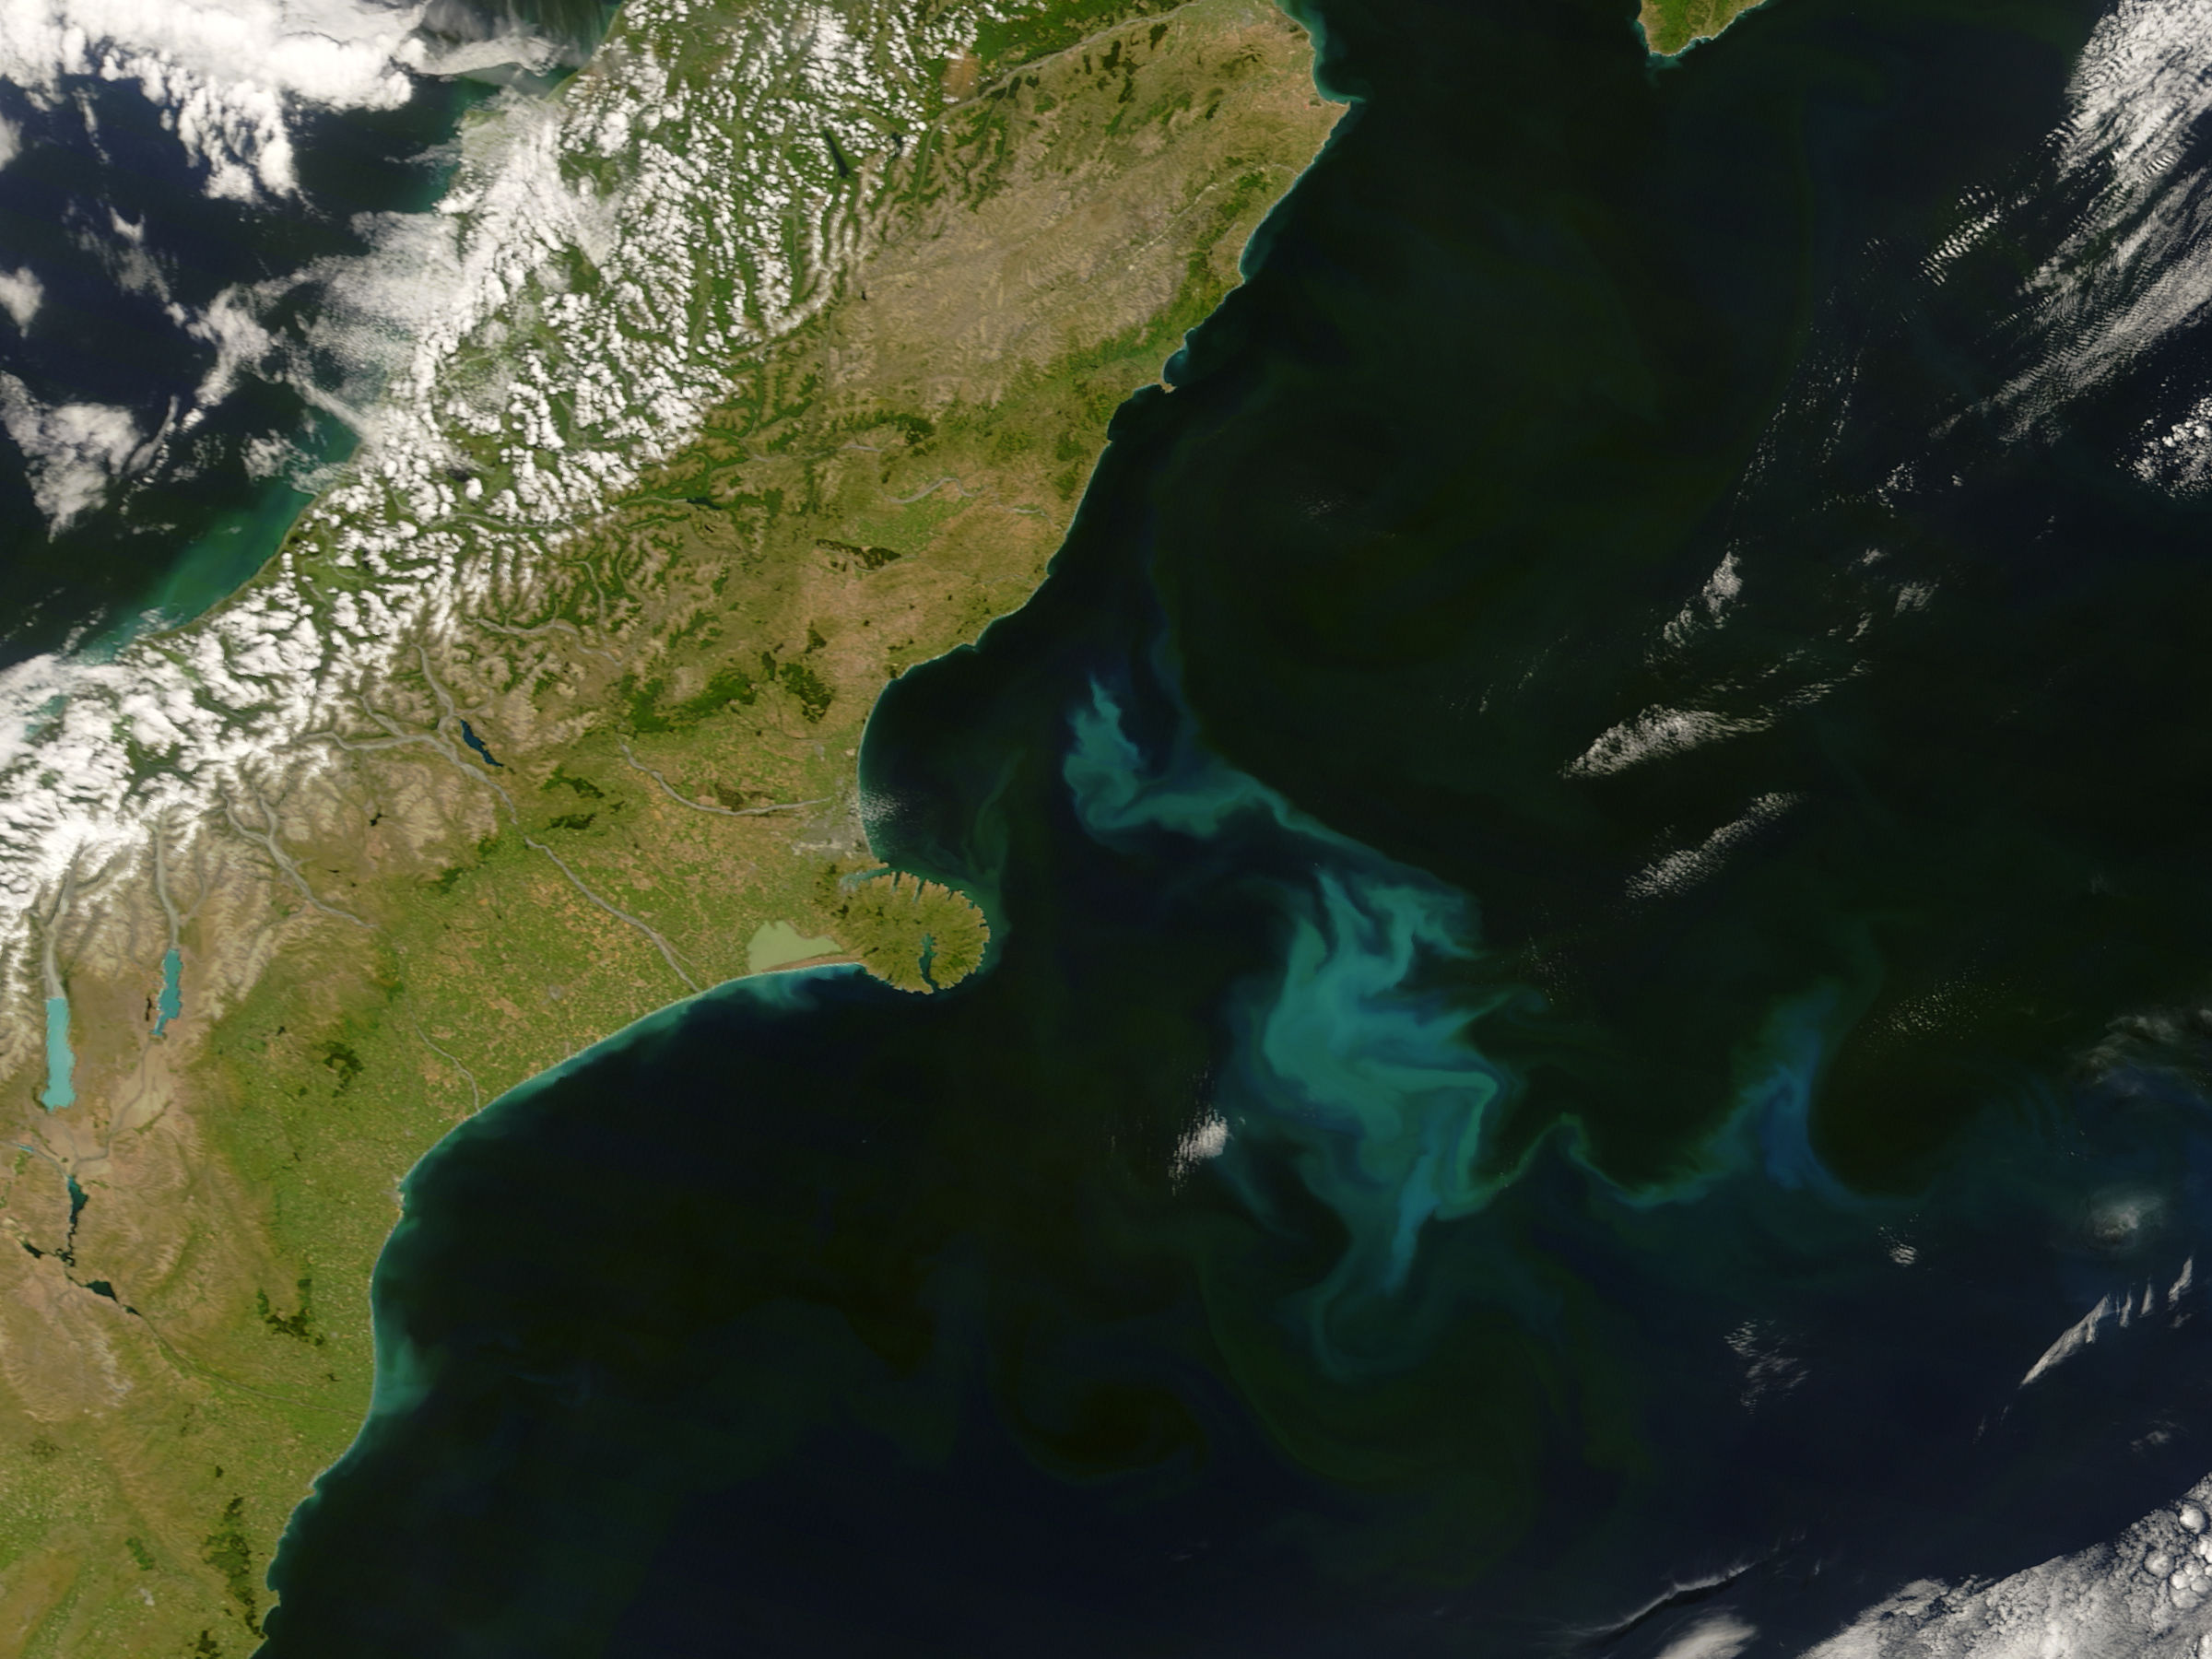 Phytoplankton Bloom off West Africa